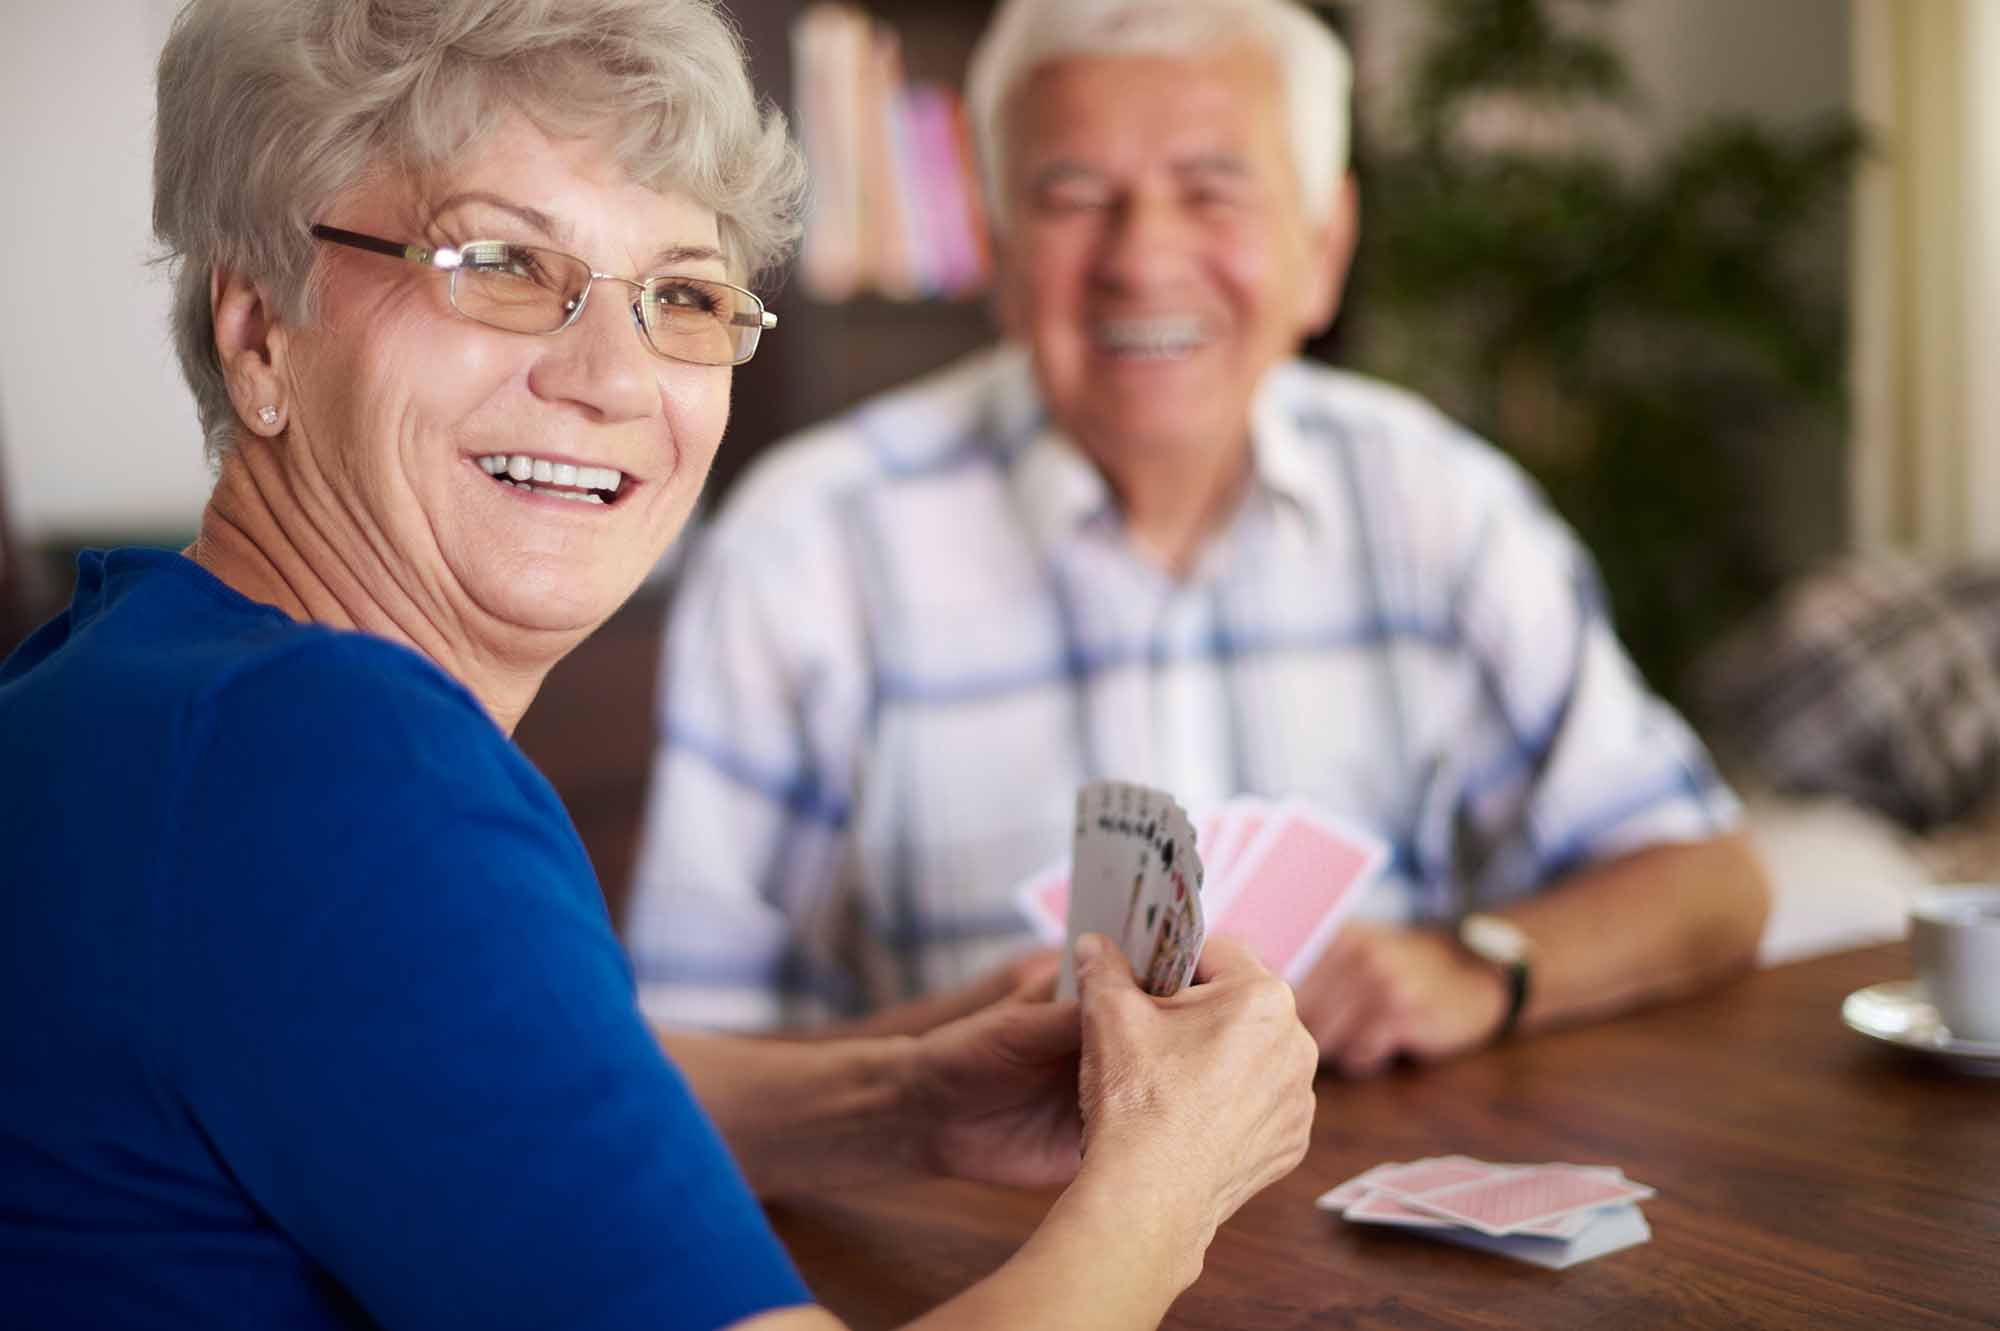 Card games - stimulating game for individuals with dementia